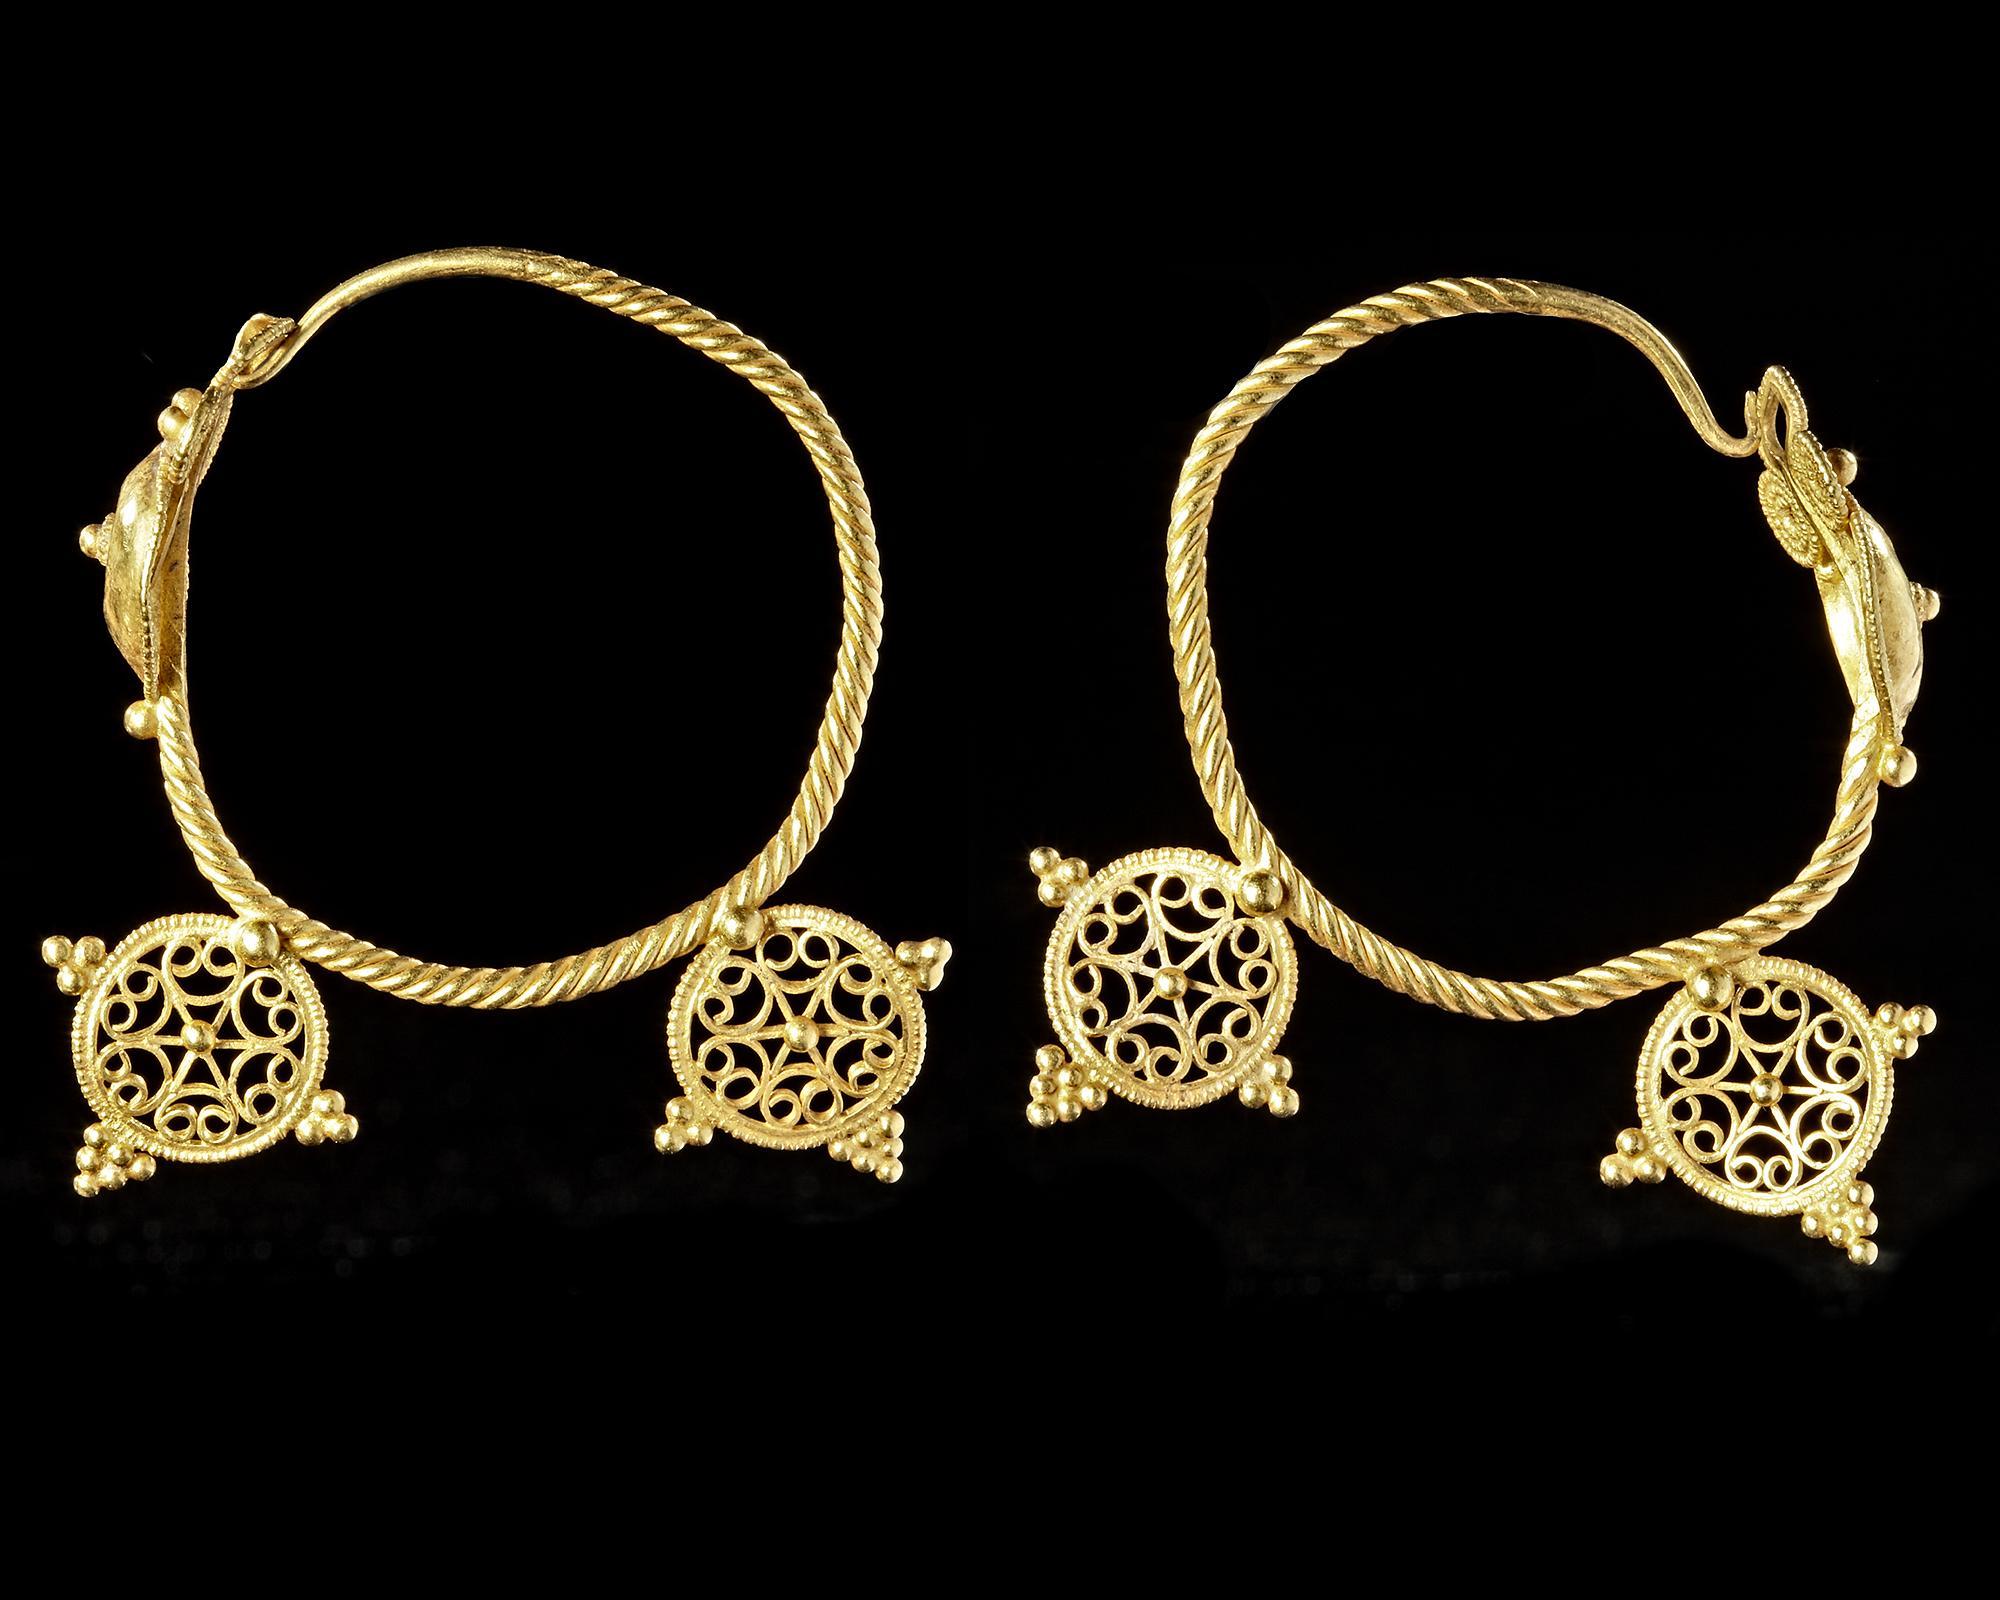 A PAIR OF BYZANTINE GOLD EARRINGS, CIRCA 6TH-7TH CENTURY A.D - Image 4 of 4